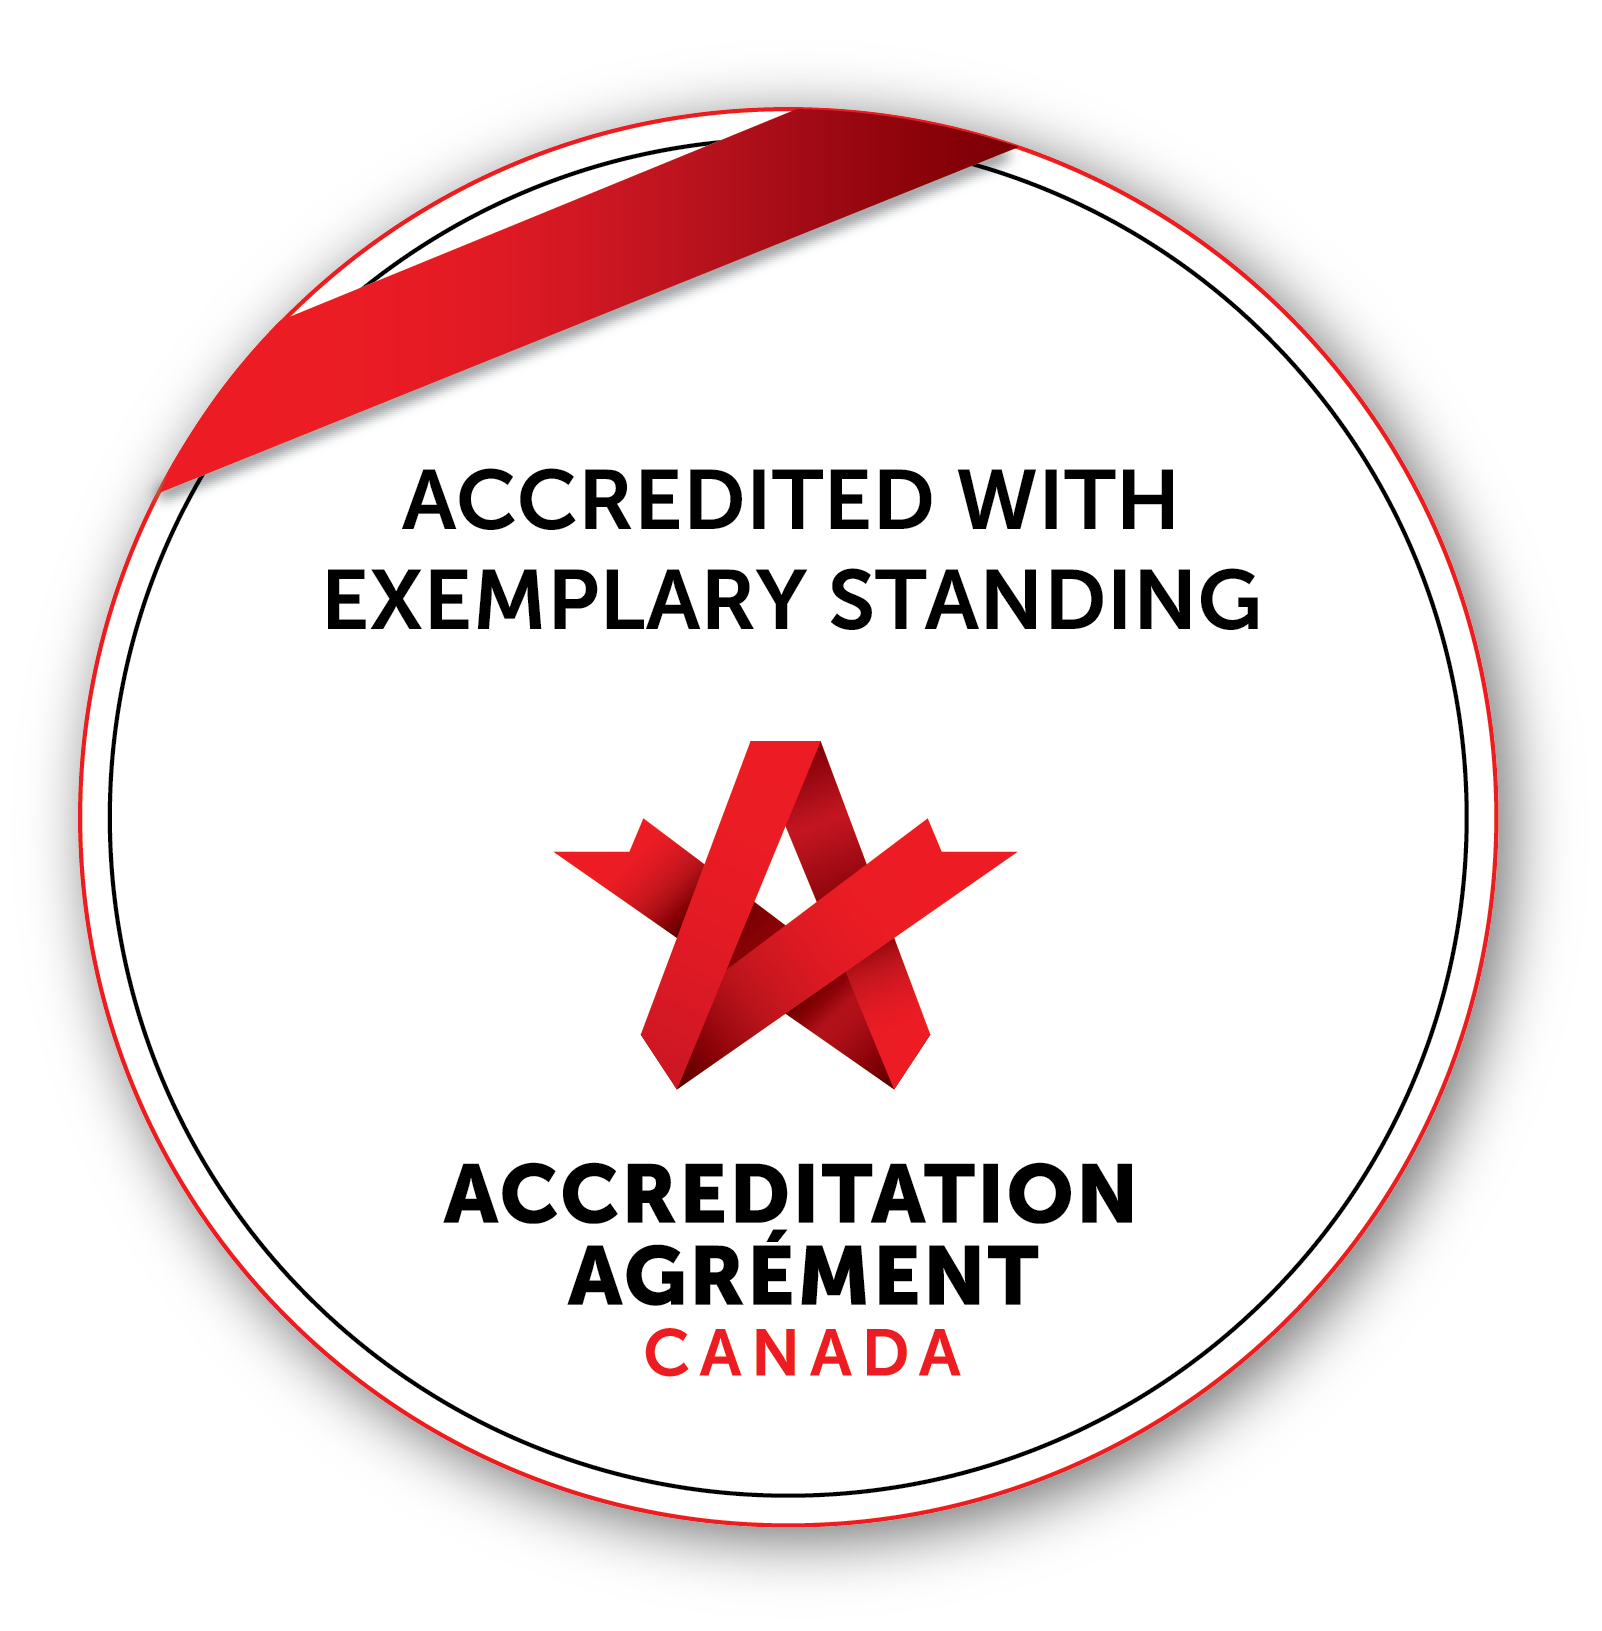 Accreditation Canada Seal-Exemplary Standing